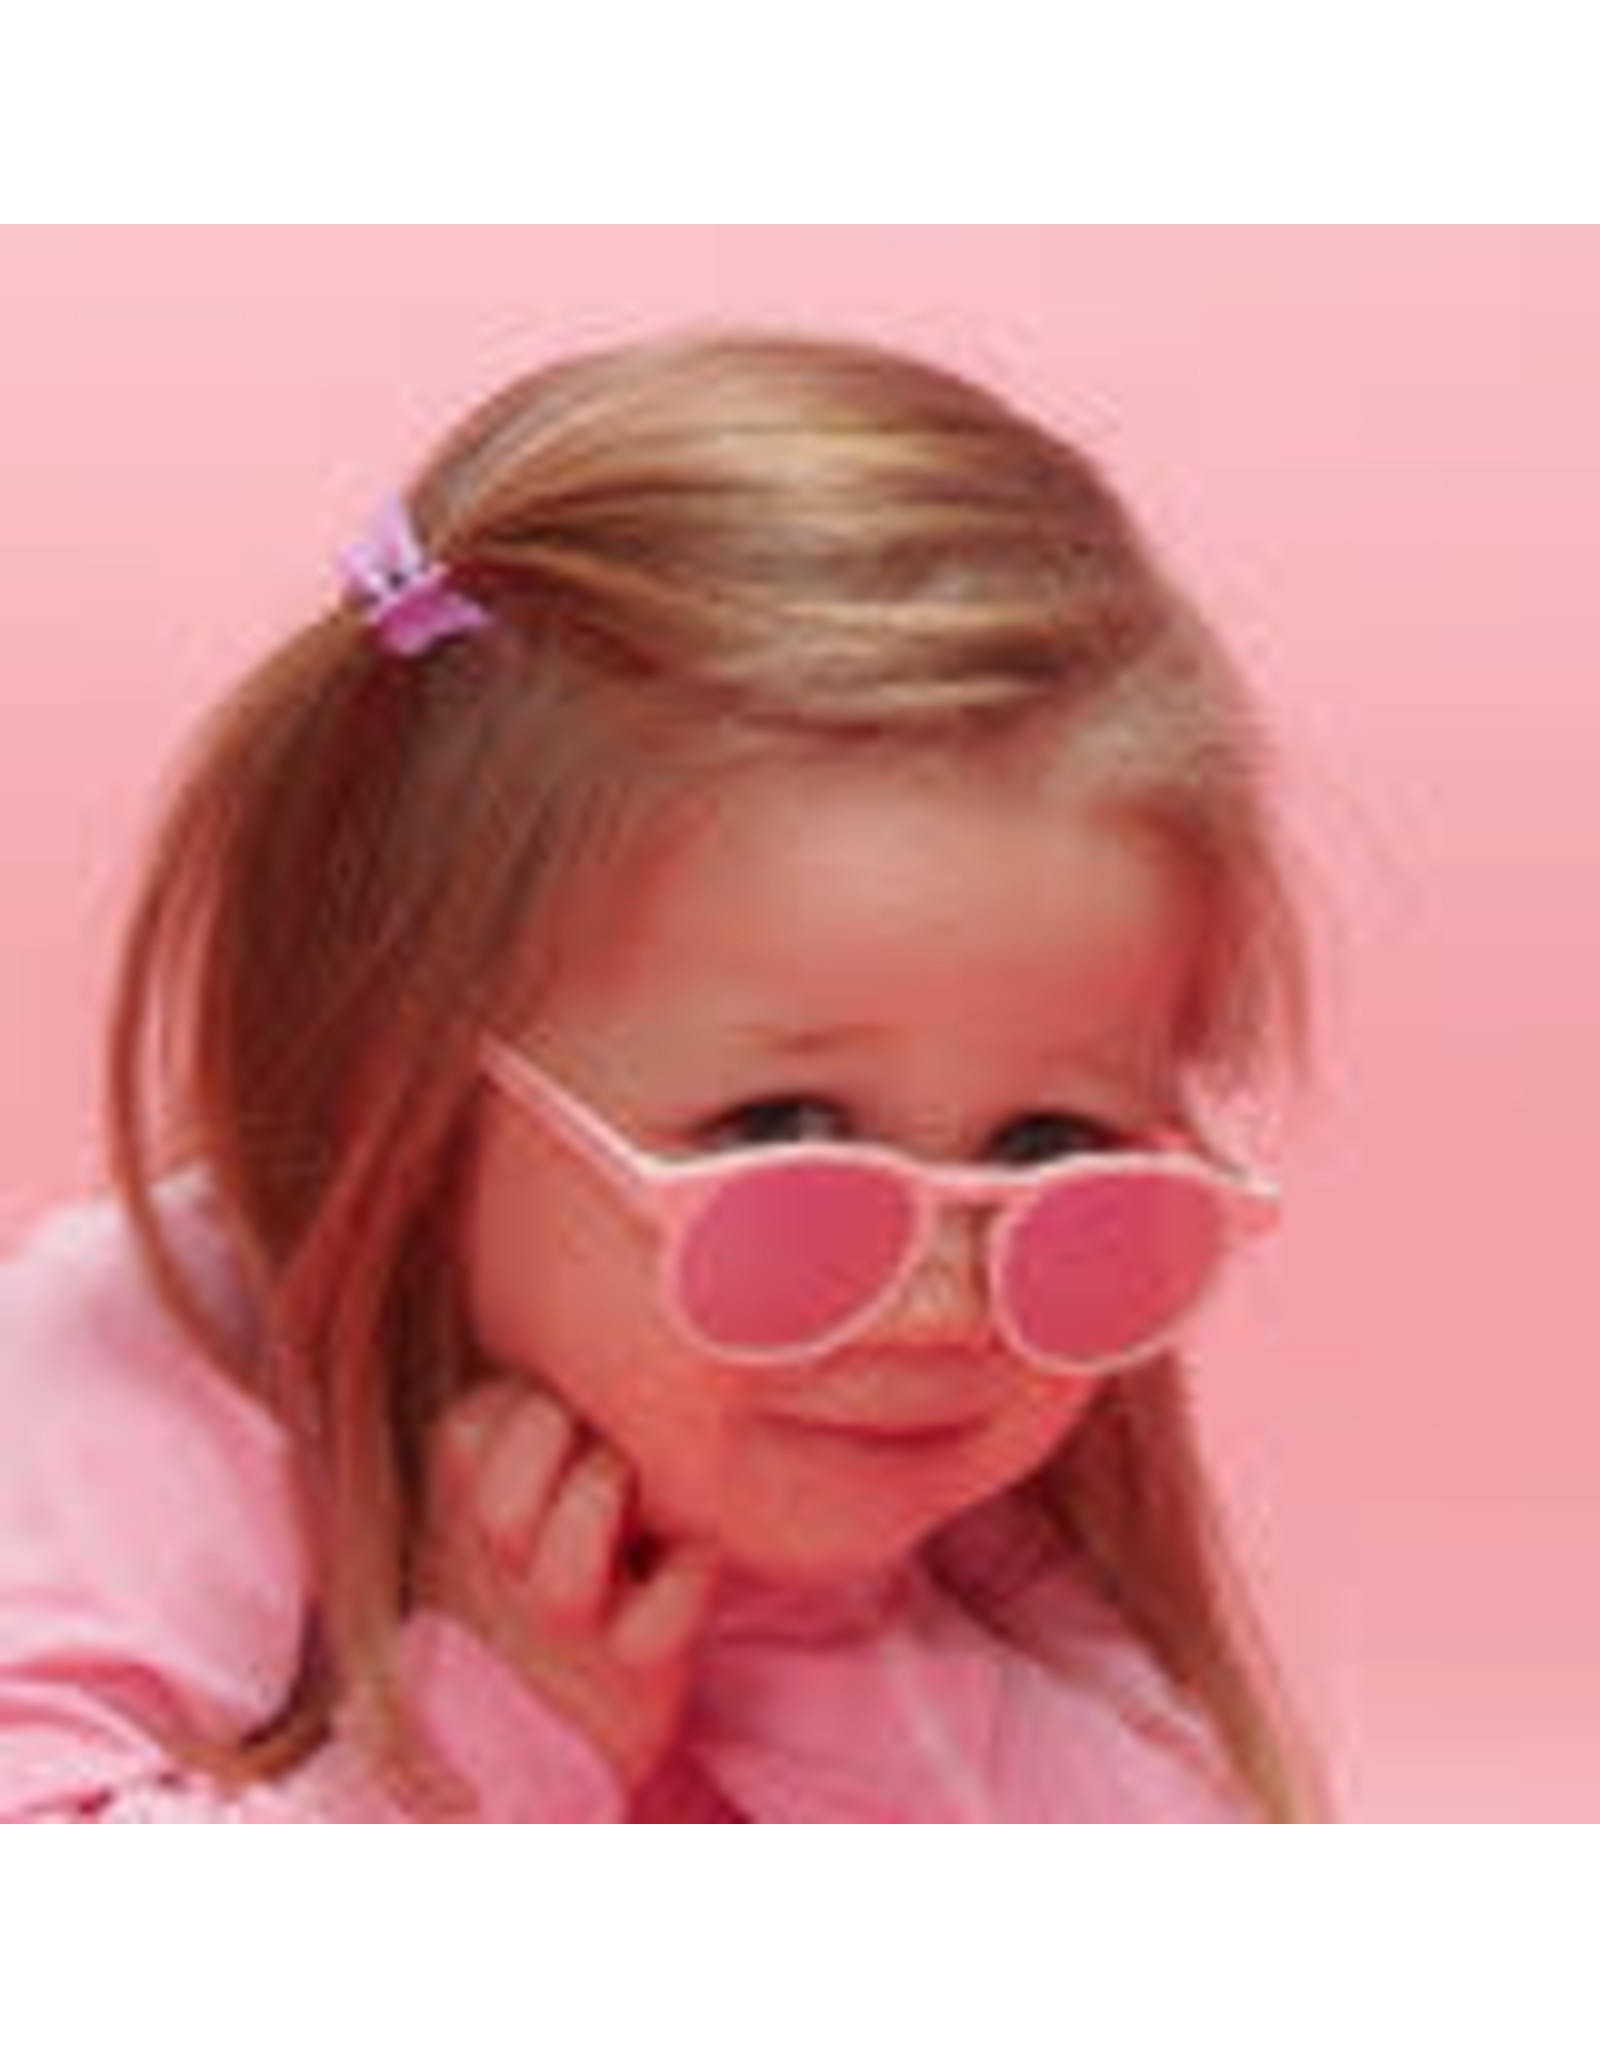 Babiators Polarized Keyhole: Pretty in Pink with Pink Mirrored Lenses